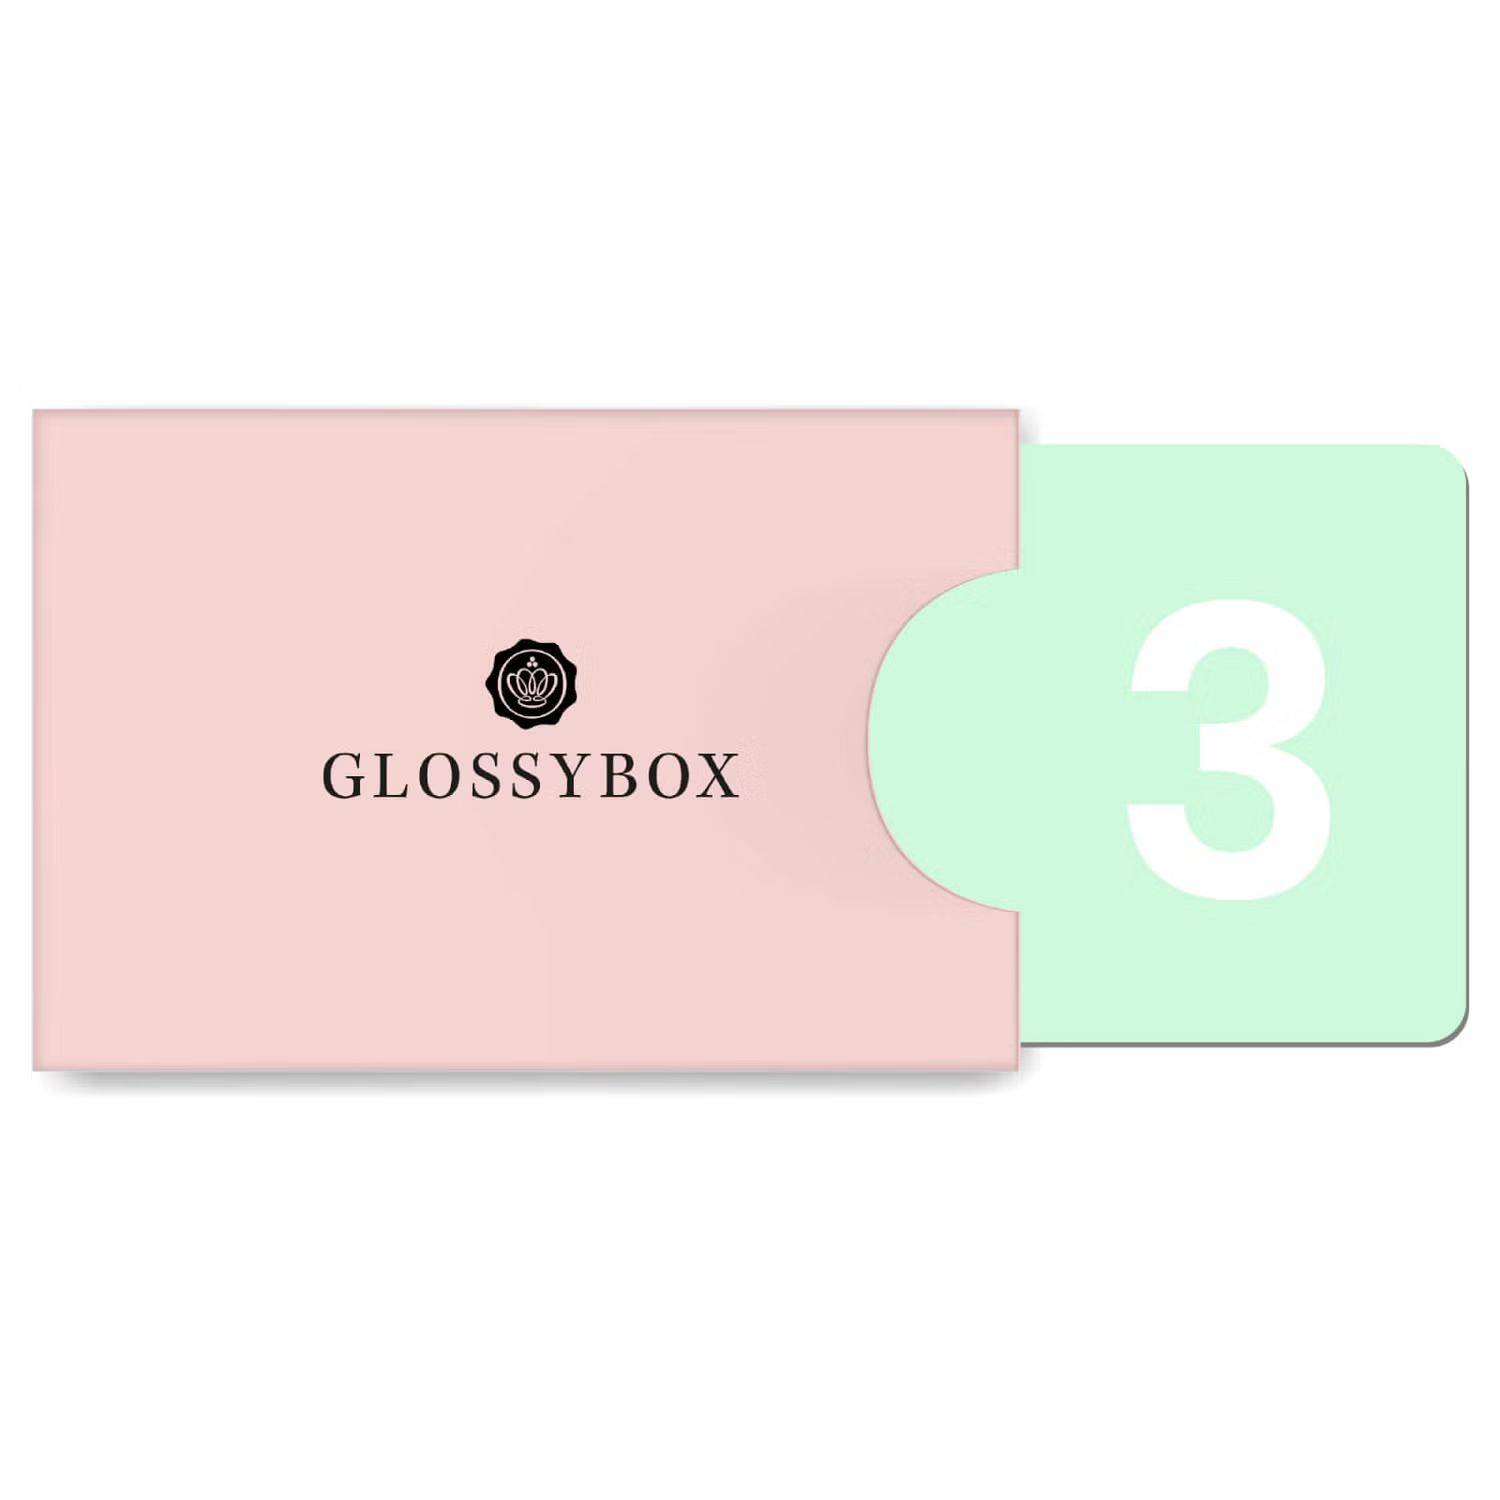 See all reviews | Glossybox (UK)